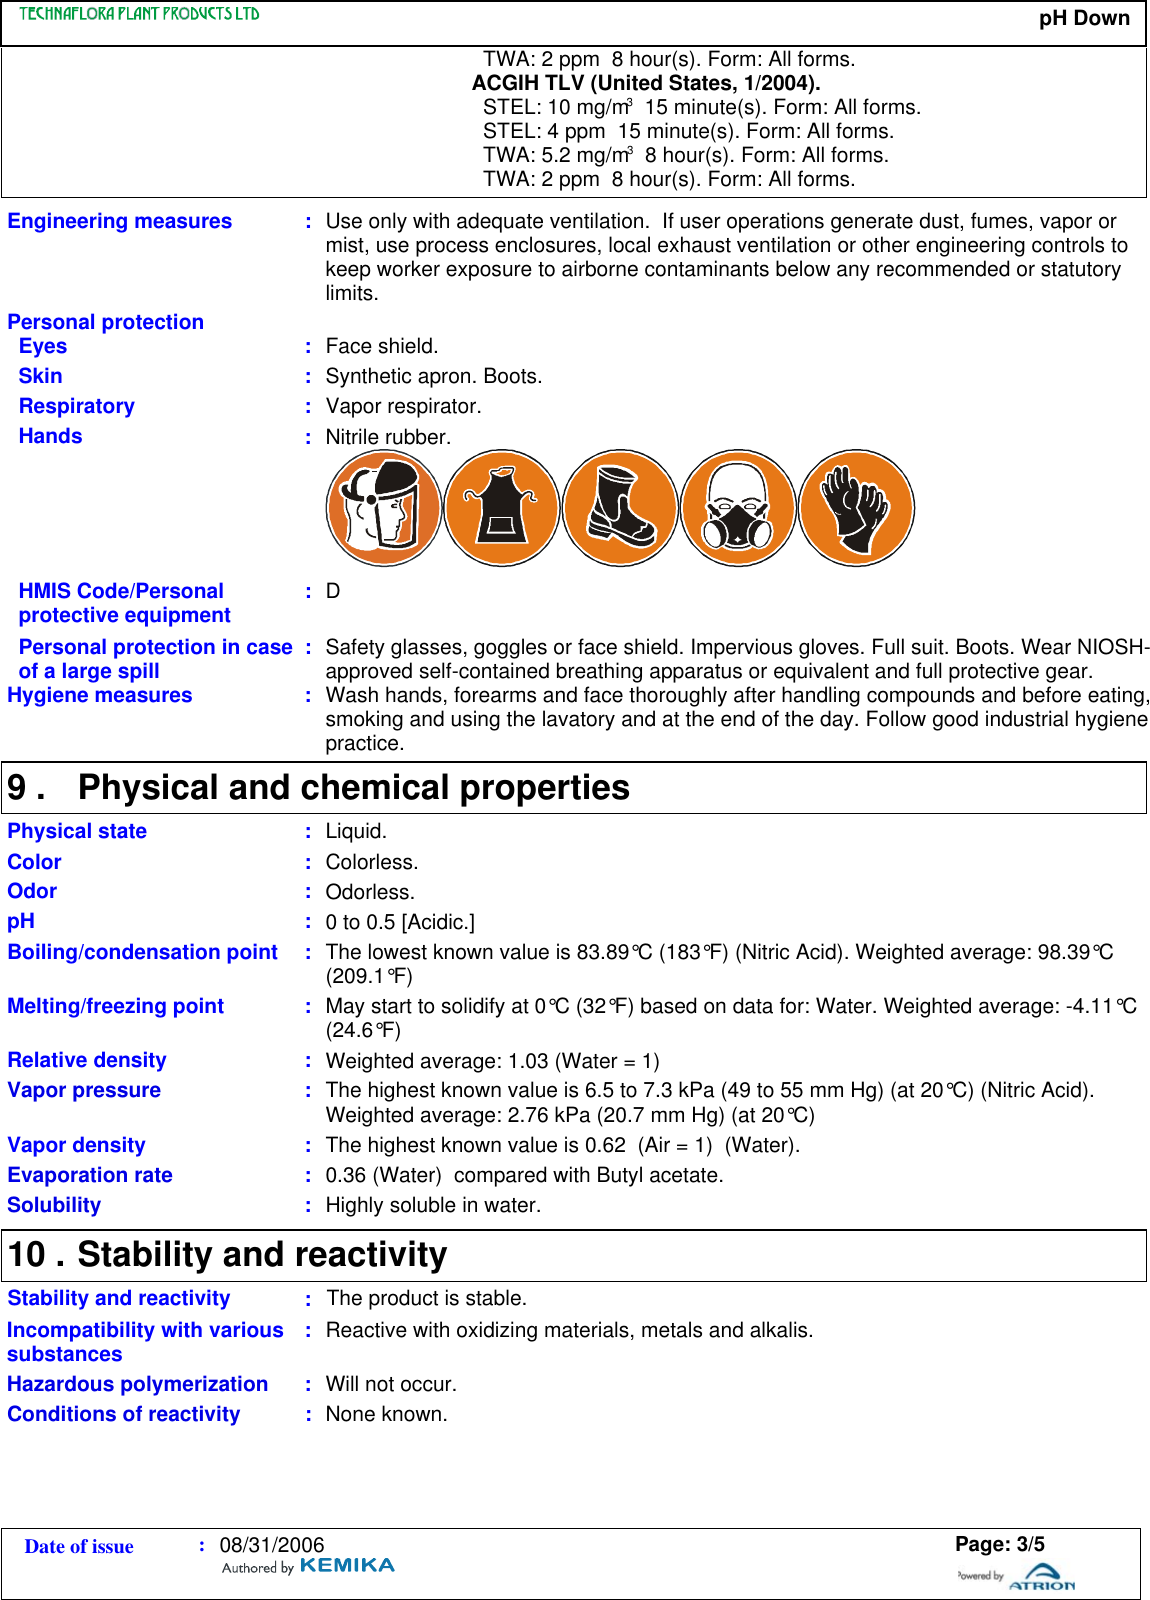 Page 3 of 5 - CHEMMATE500  716464 MSDS